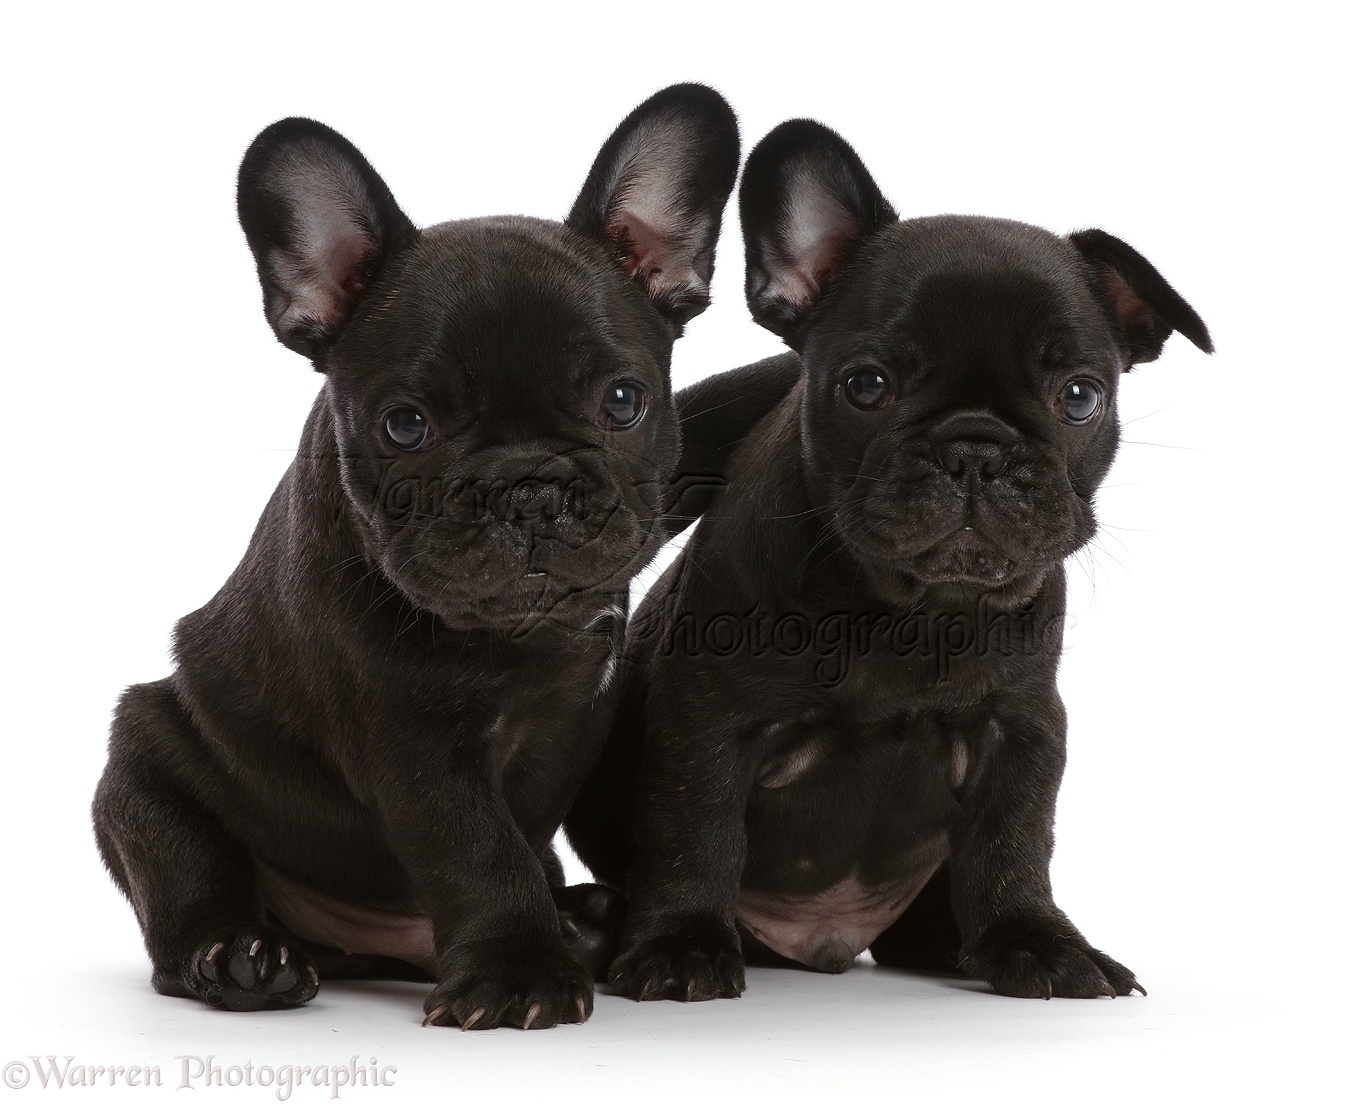 Two French Bulldog puppies, 6 weeks old, sitting photo WP45200